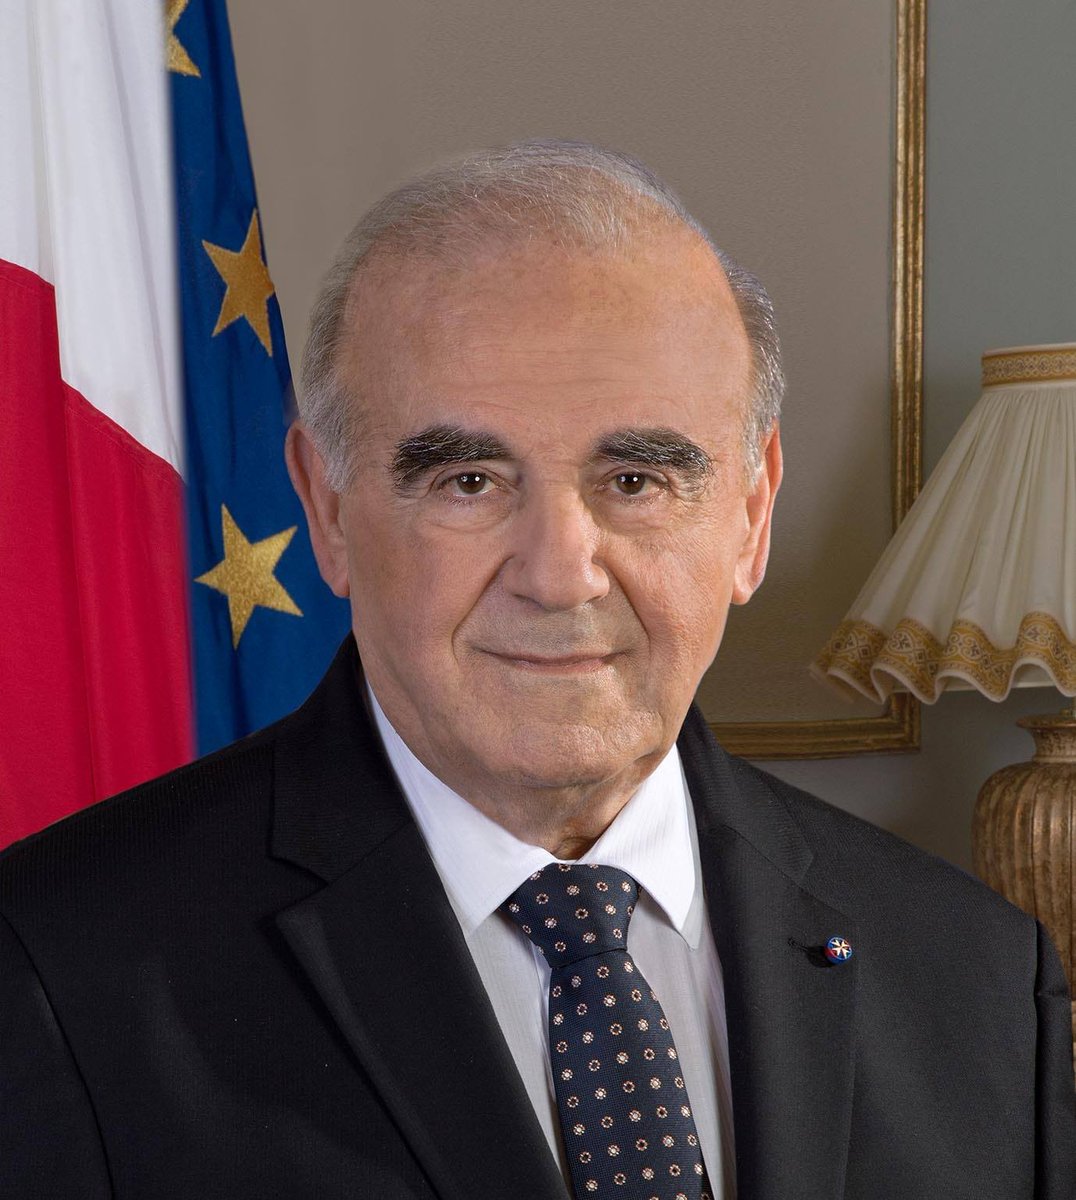 'I will never sign a bill that involves the authorization of murder... if I don’t agree with a bill, to resign and go home, I have no problem doing this.' -  George Vella, President of Malta